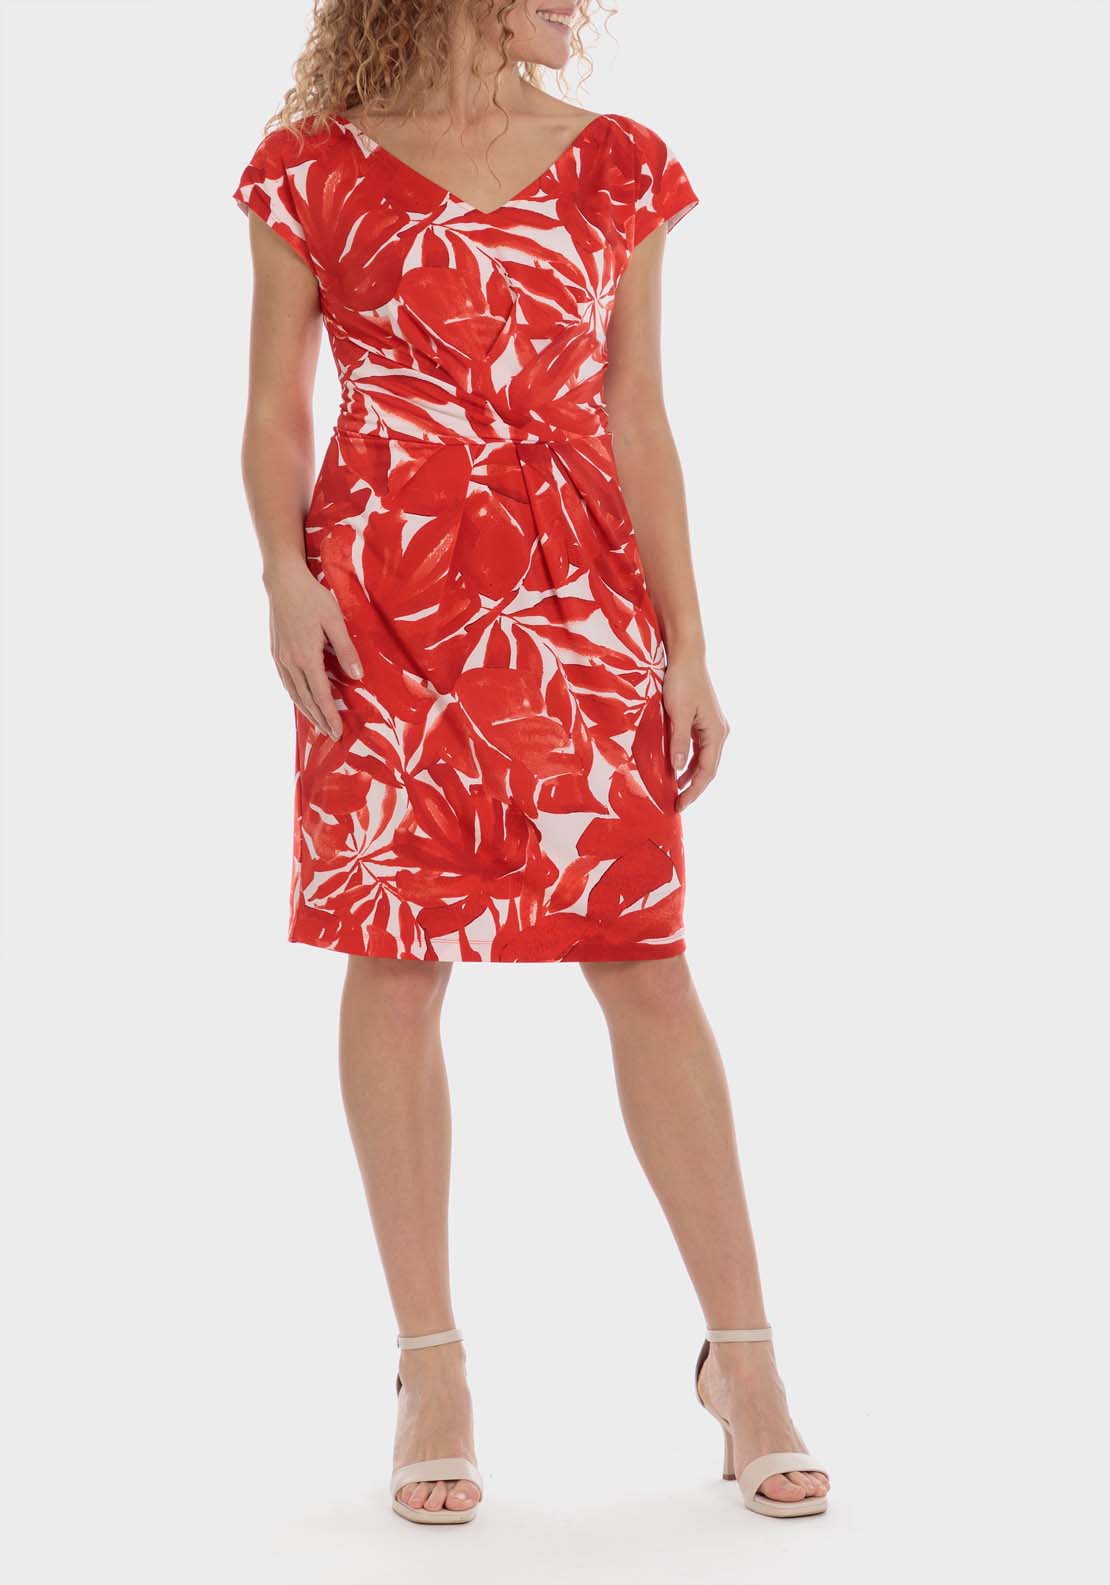 Punt Roma Tropical Print Dress - Red 2 Shaws Department Stores